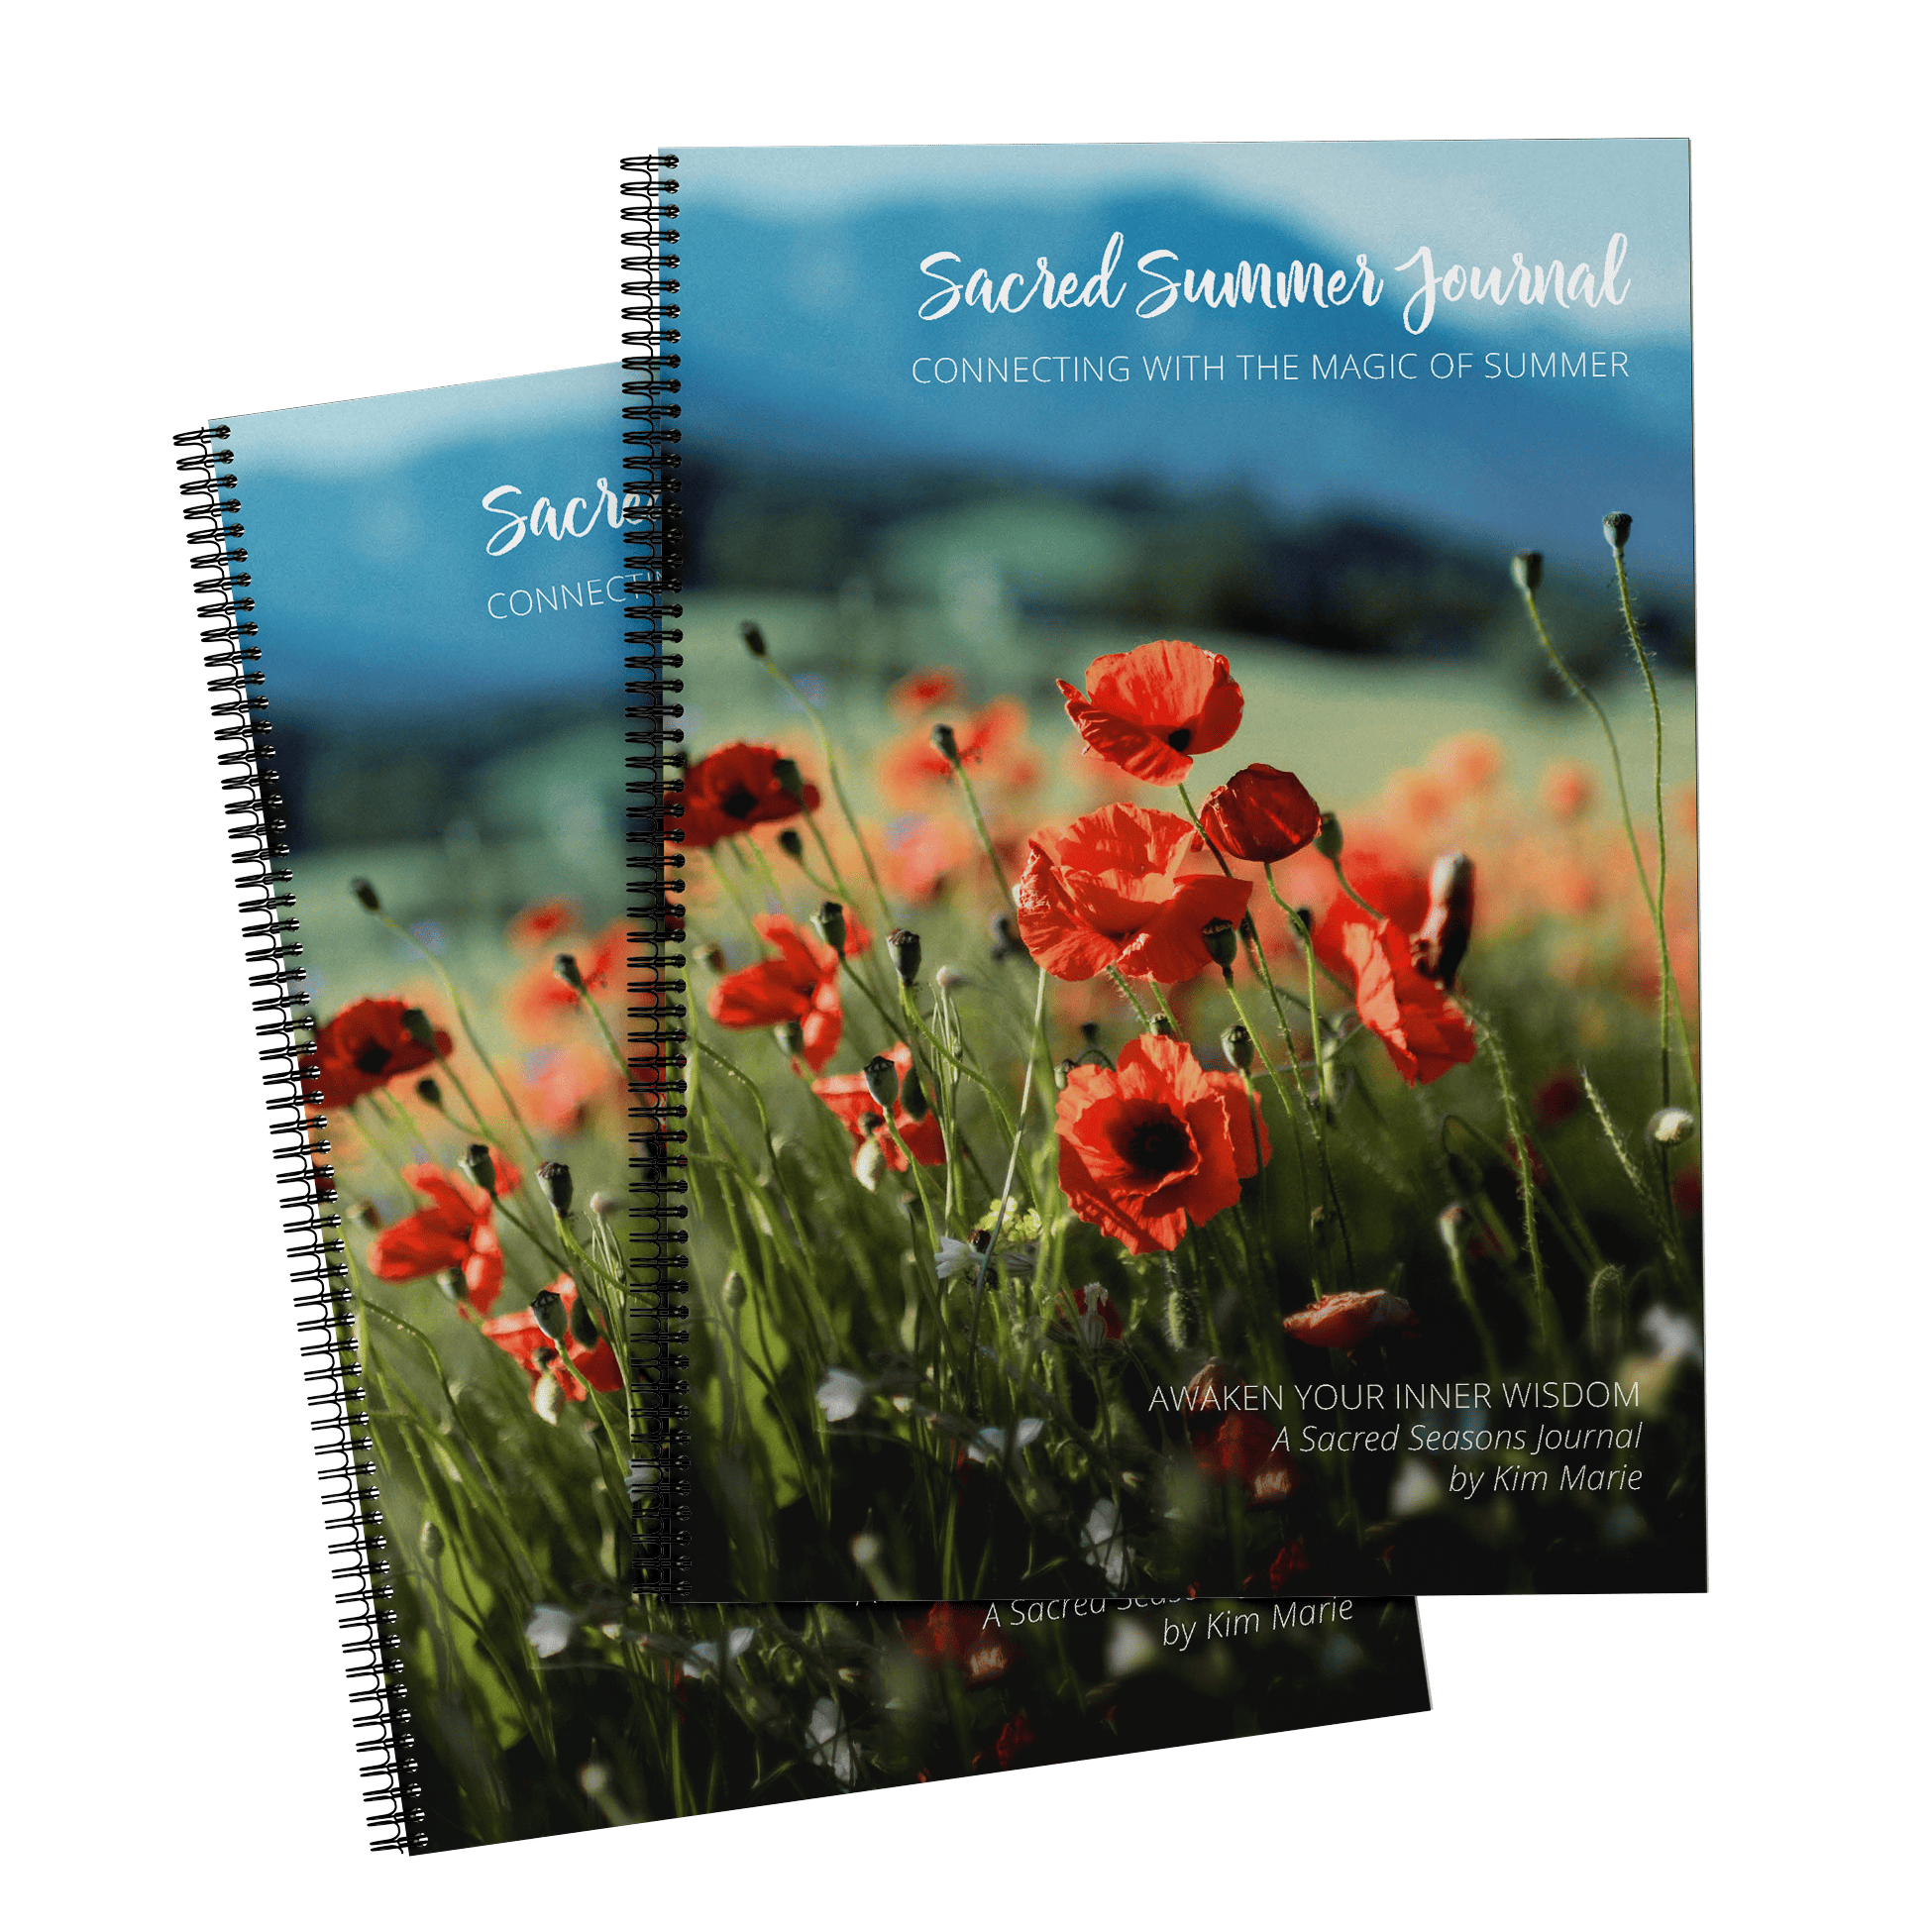 Sacred Summer Journal, part of Sacred Seasons Journals by Kim Marie. Connect with Nature and yourself by connecting with the Seasons.